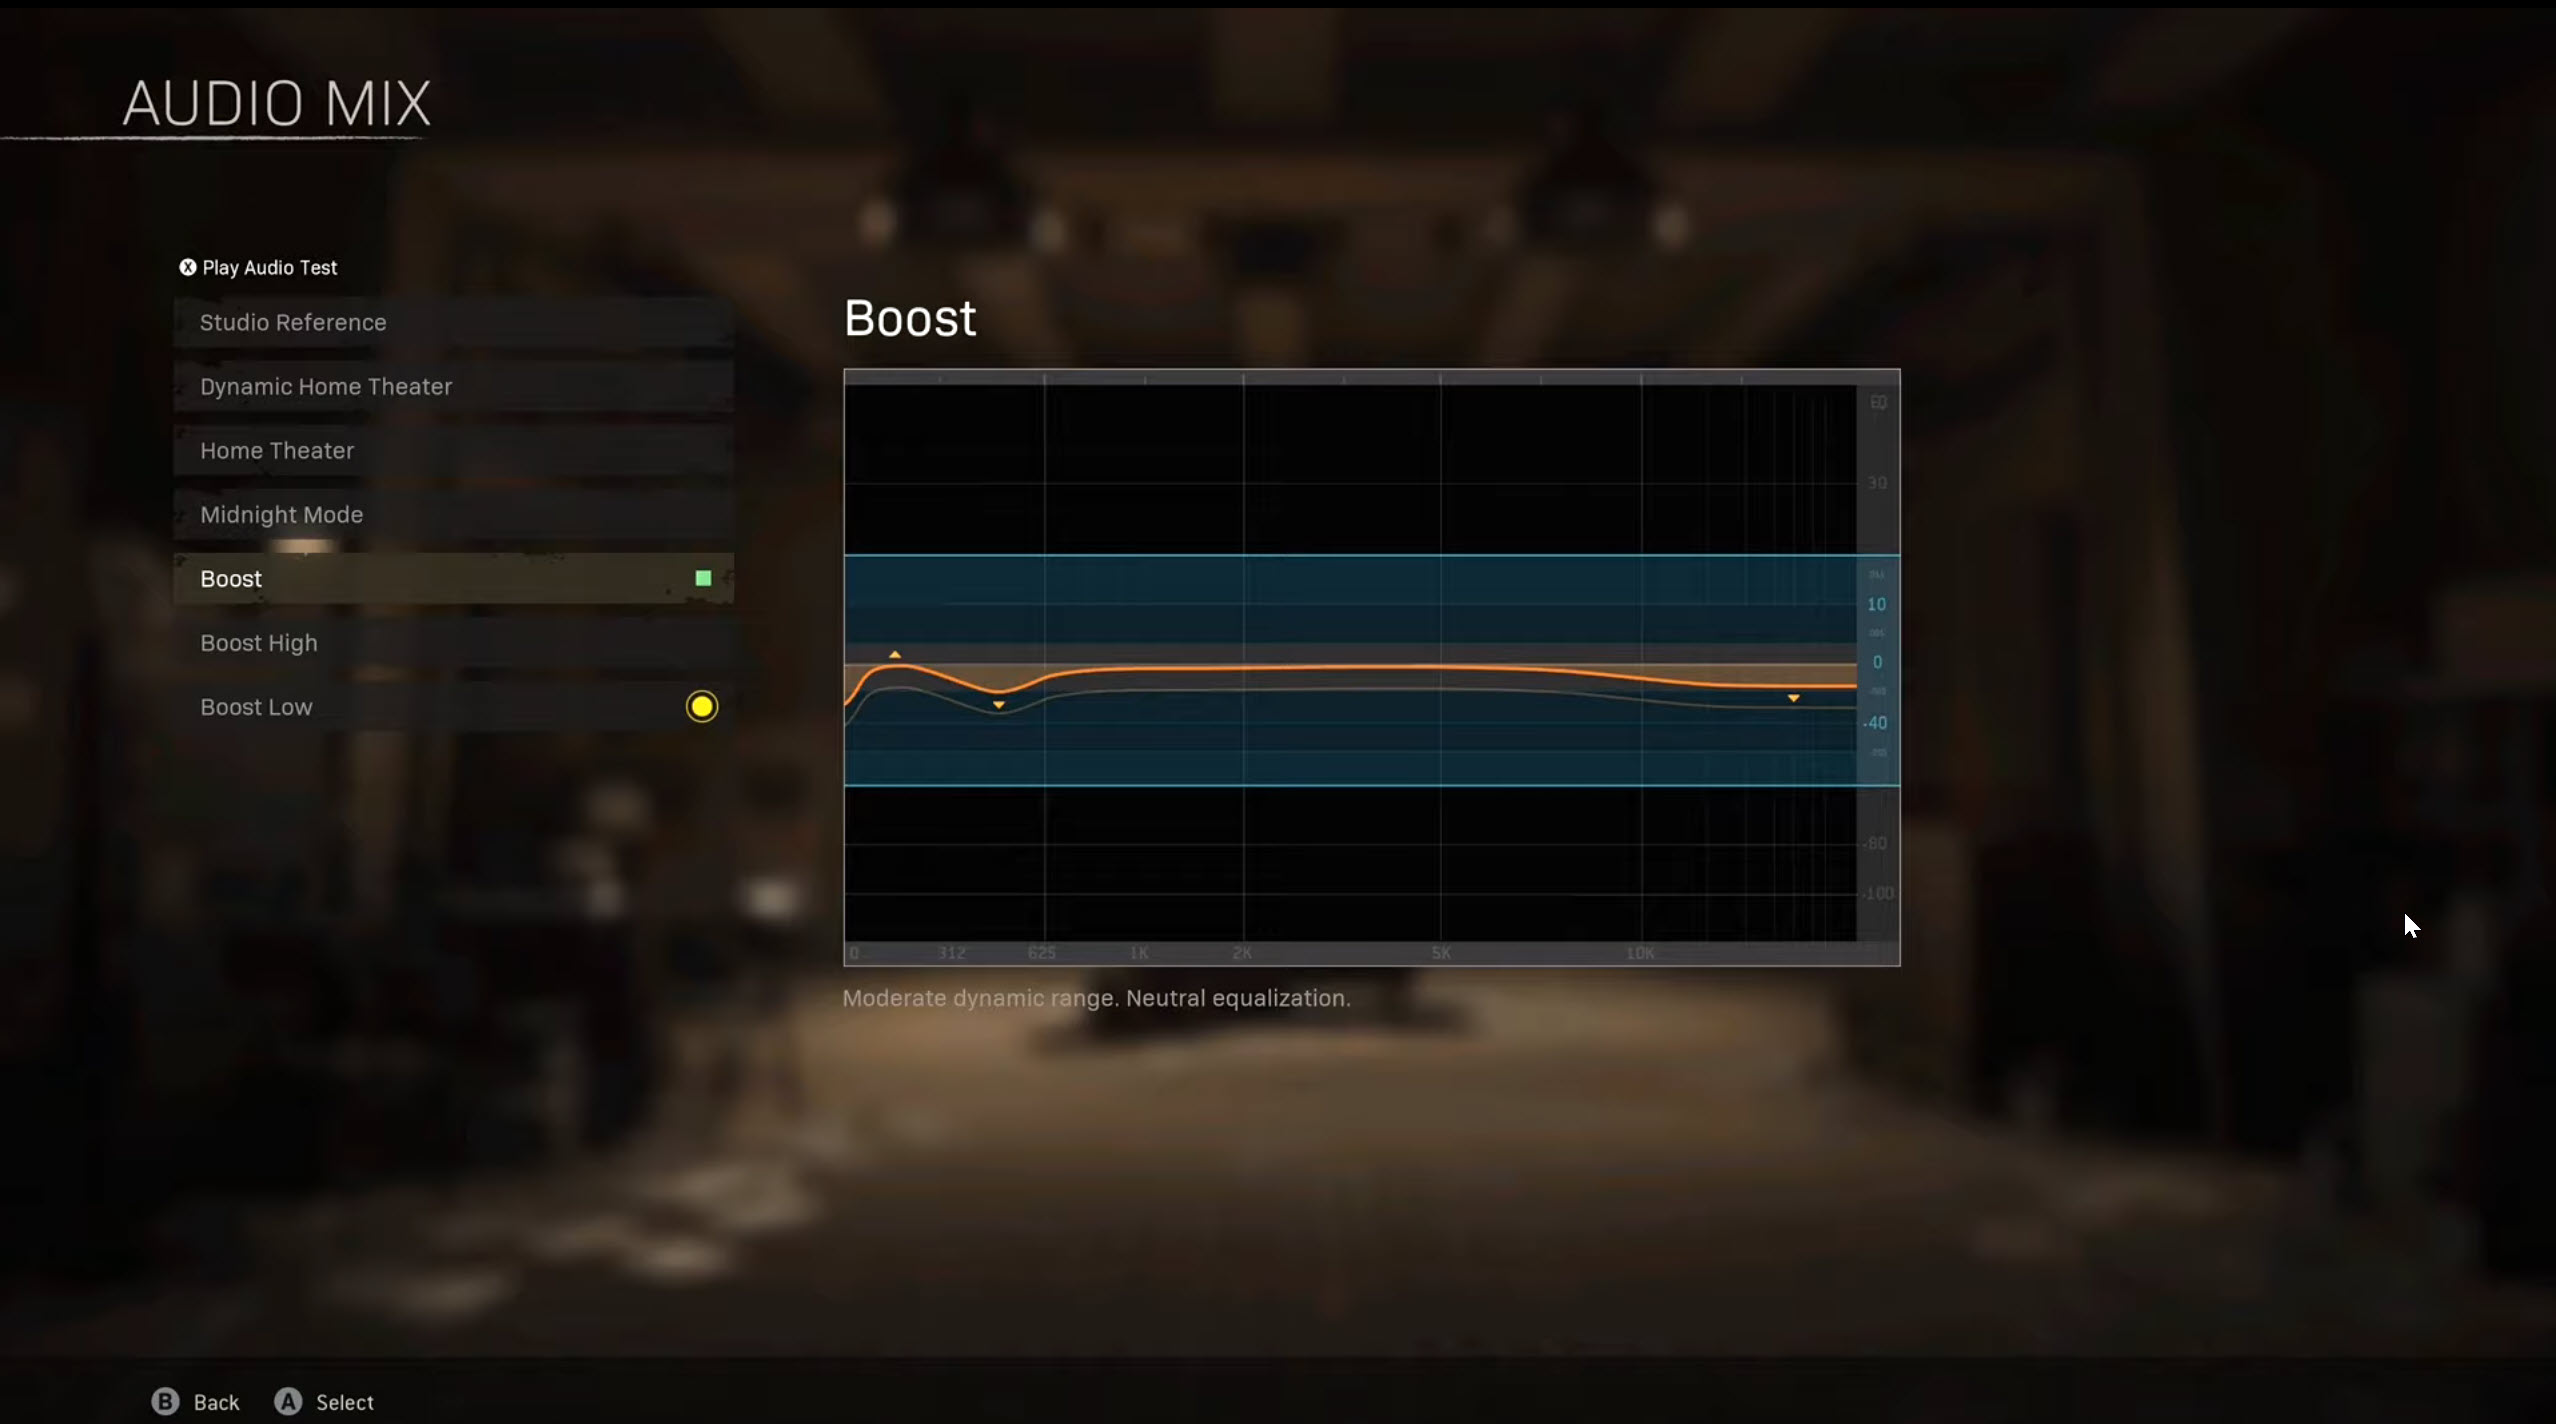 The Audio Mix Screen on First Game Boot